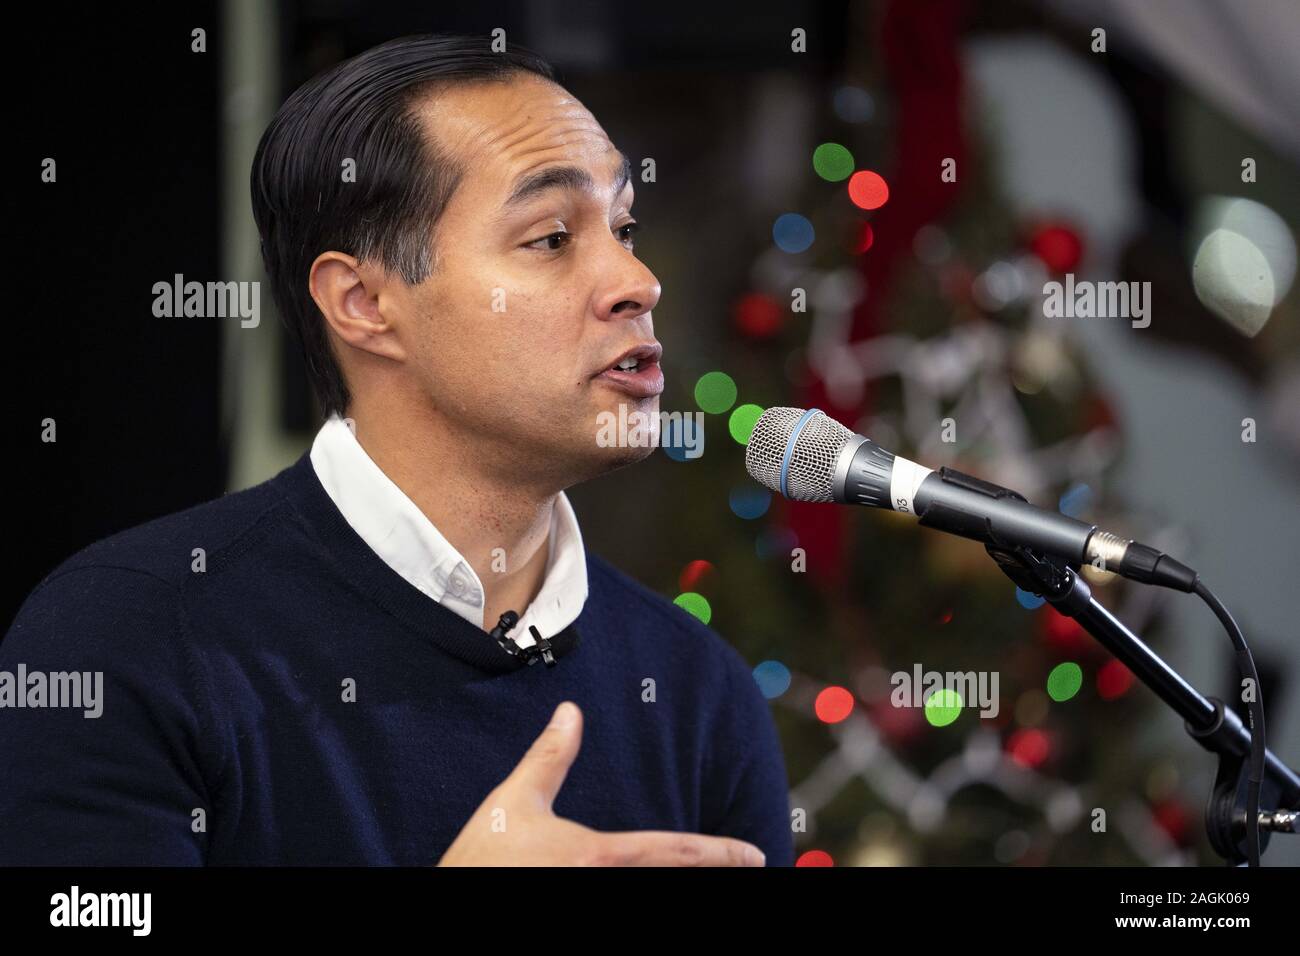 Pasadena, USA. 15th Mar, 2019. Democratic presidential candidate, Julian Castro, speaks at the town hall on workers solidarity and migrant justice in Pasadena, California. Castro met with his community members at the Job Center ahead of the Democratic Party Debate to be held at Loyola Marymount University. Credit: Ronen Tivony/SOPA Images/ZUMA Wire/Alamy Live News Stock Photo